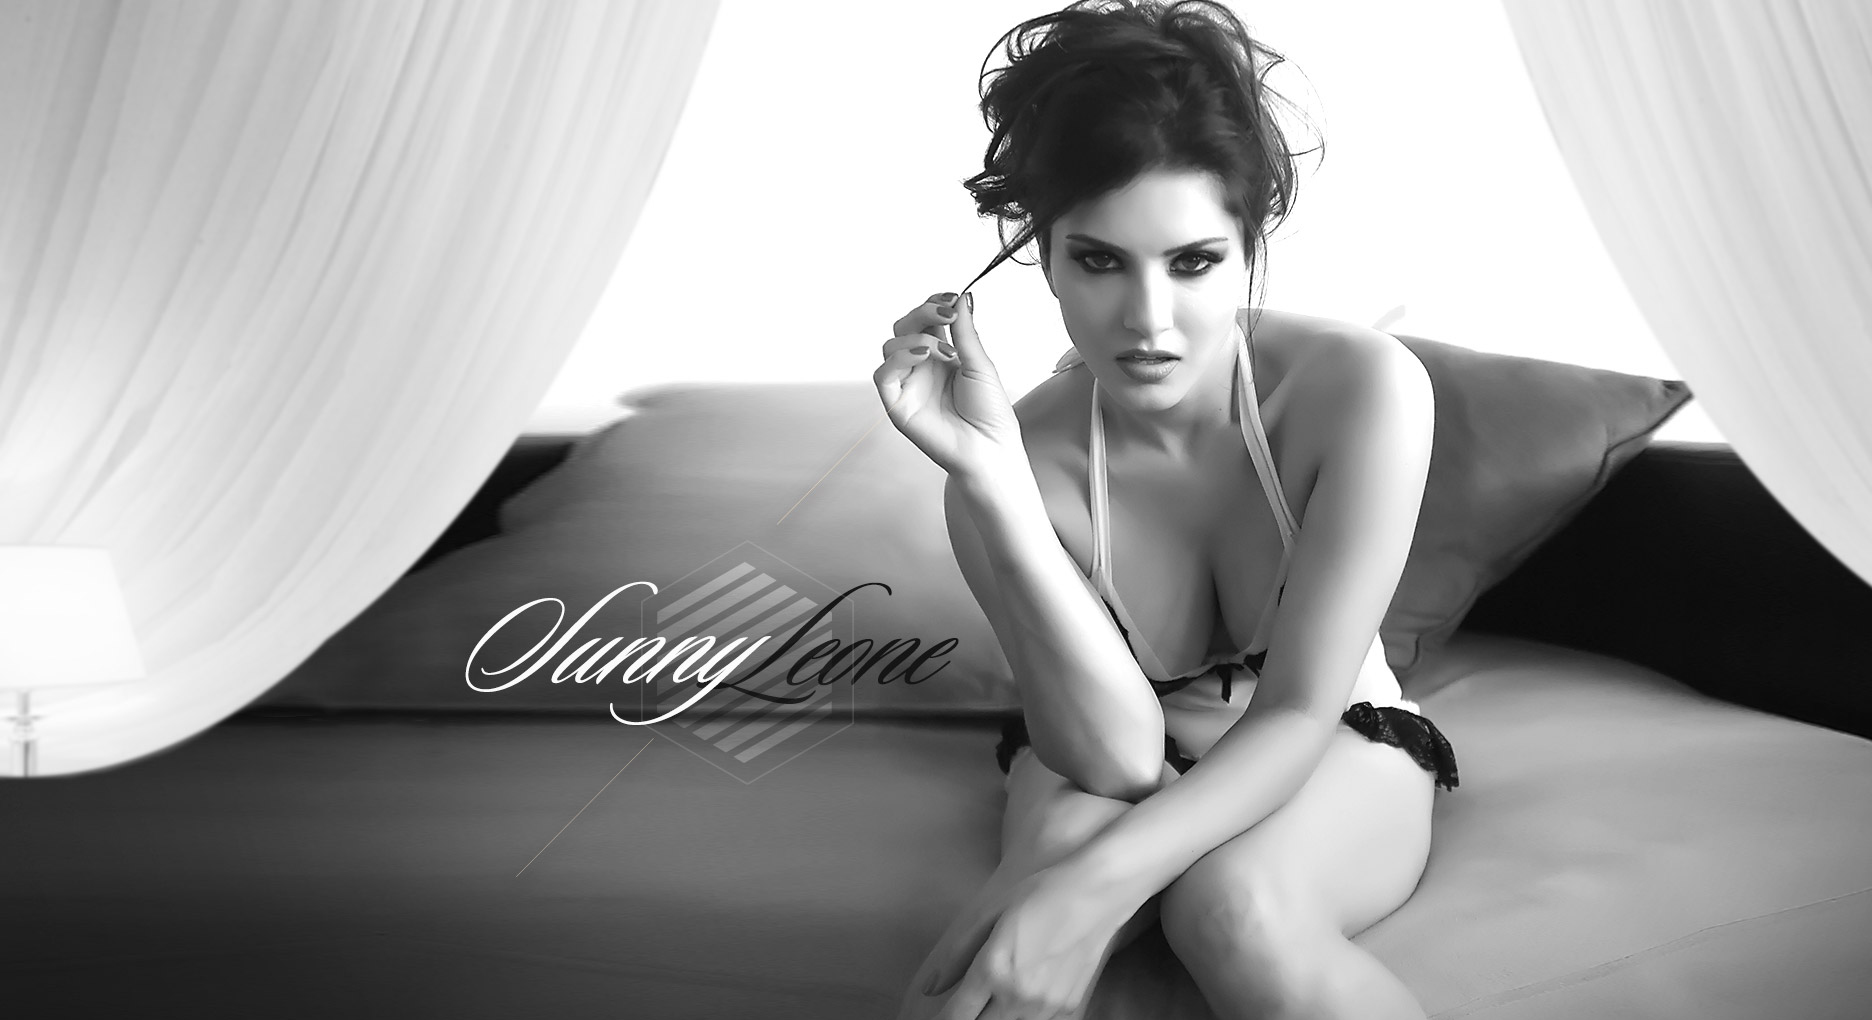 Sunny leone black and white wallpapers